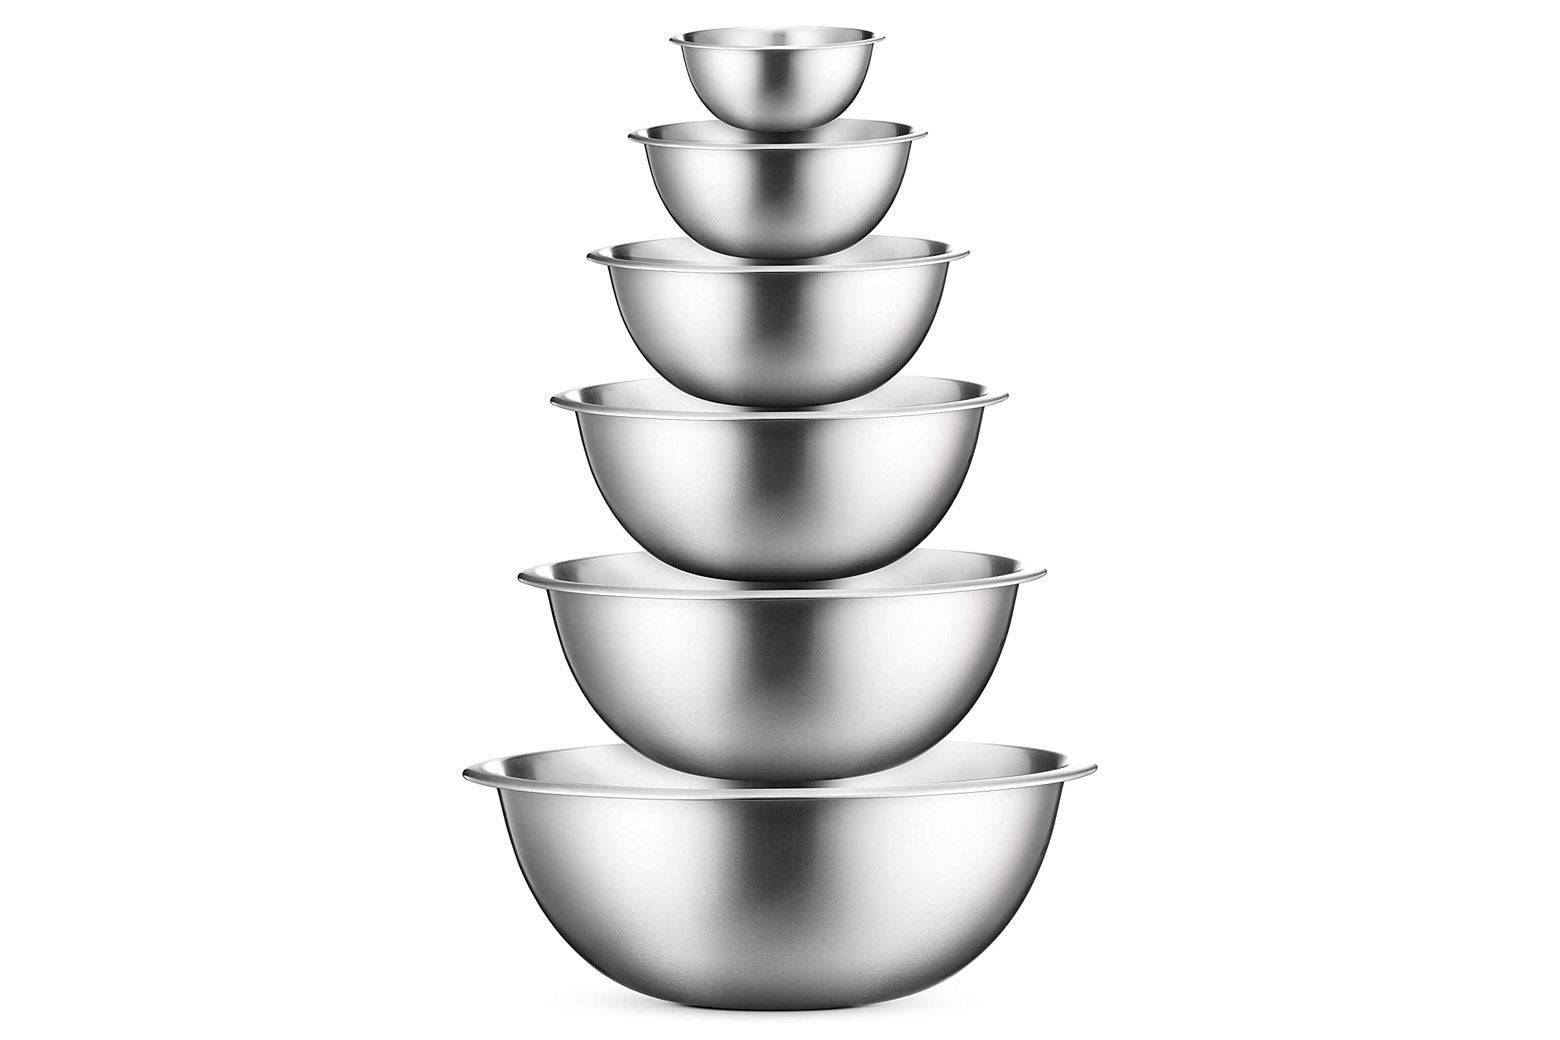 Stainless steal mixing bowls in a variety of sizes.